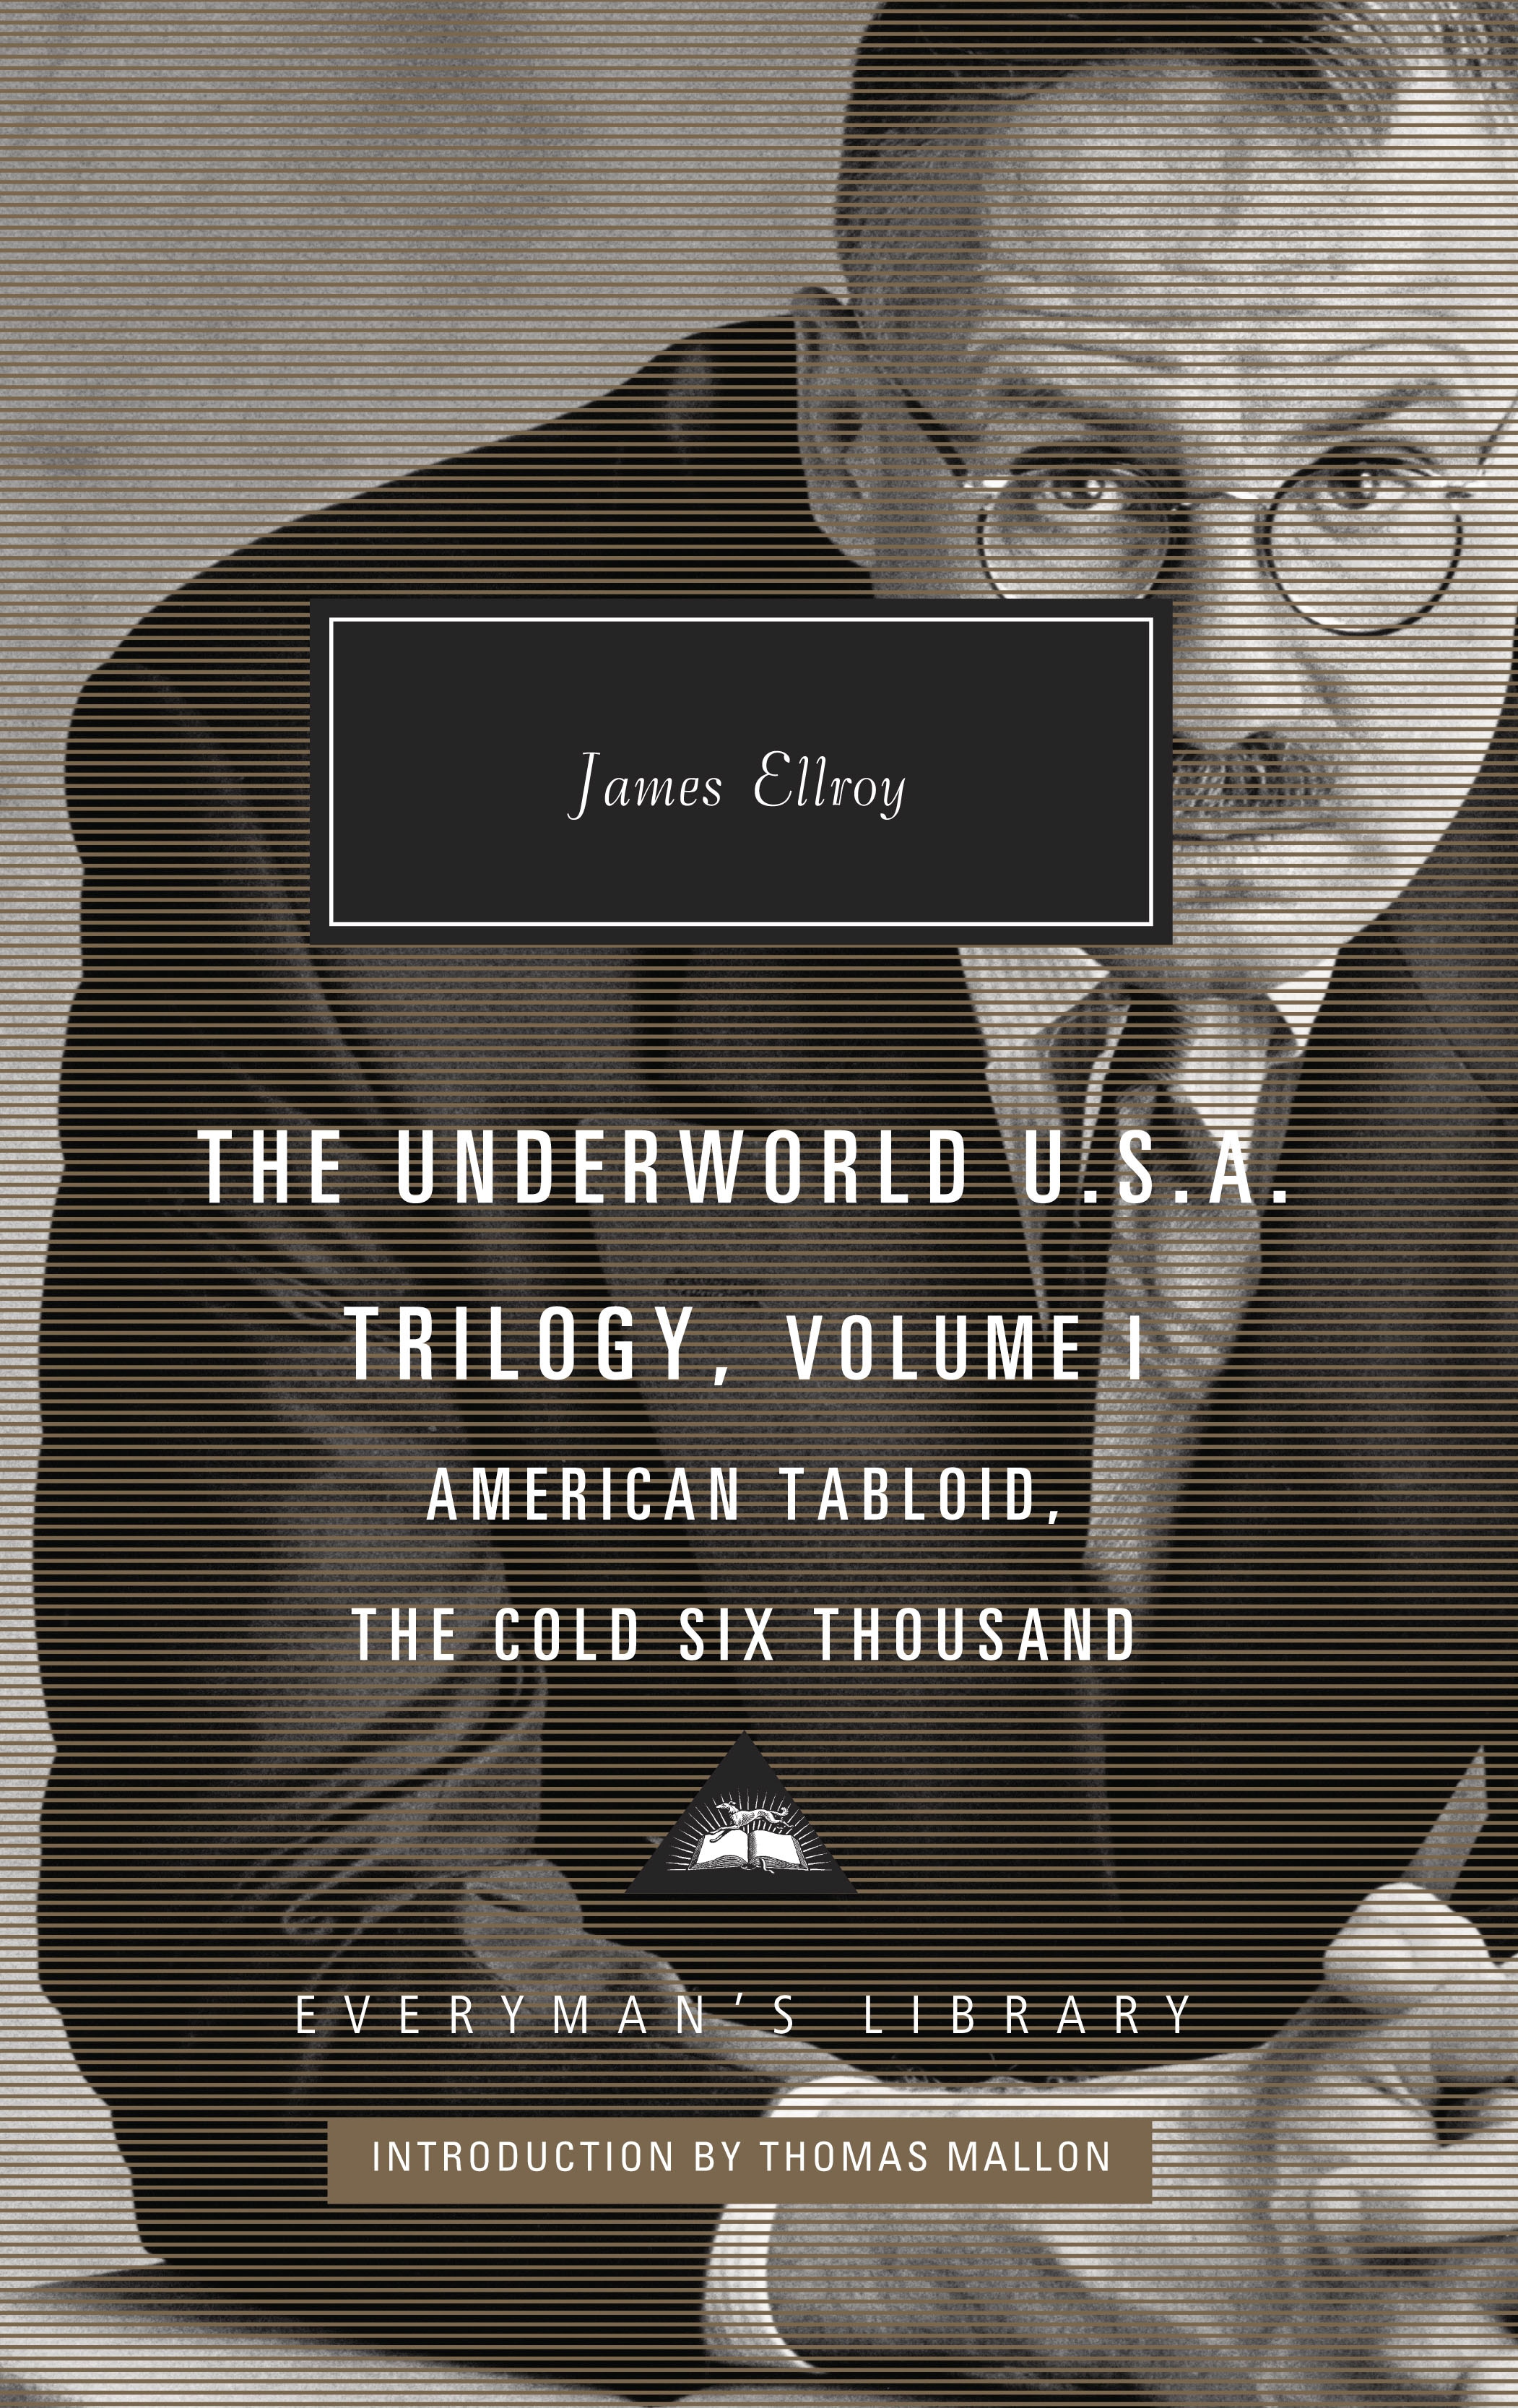 Book “American Tabloid and The Cold Six Thousand” by James Ellroy, Thomas Mallon — May 2, 2019